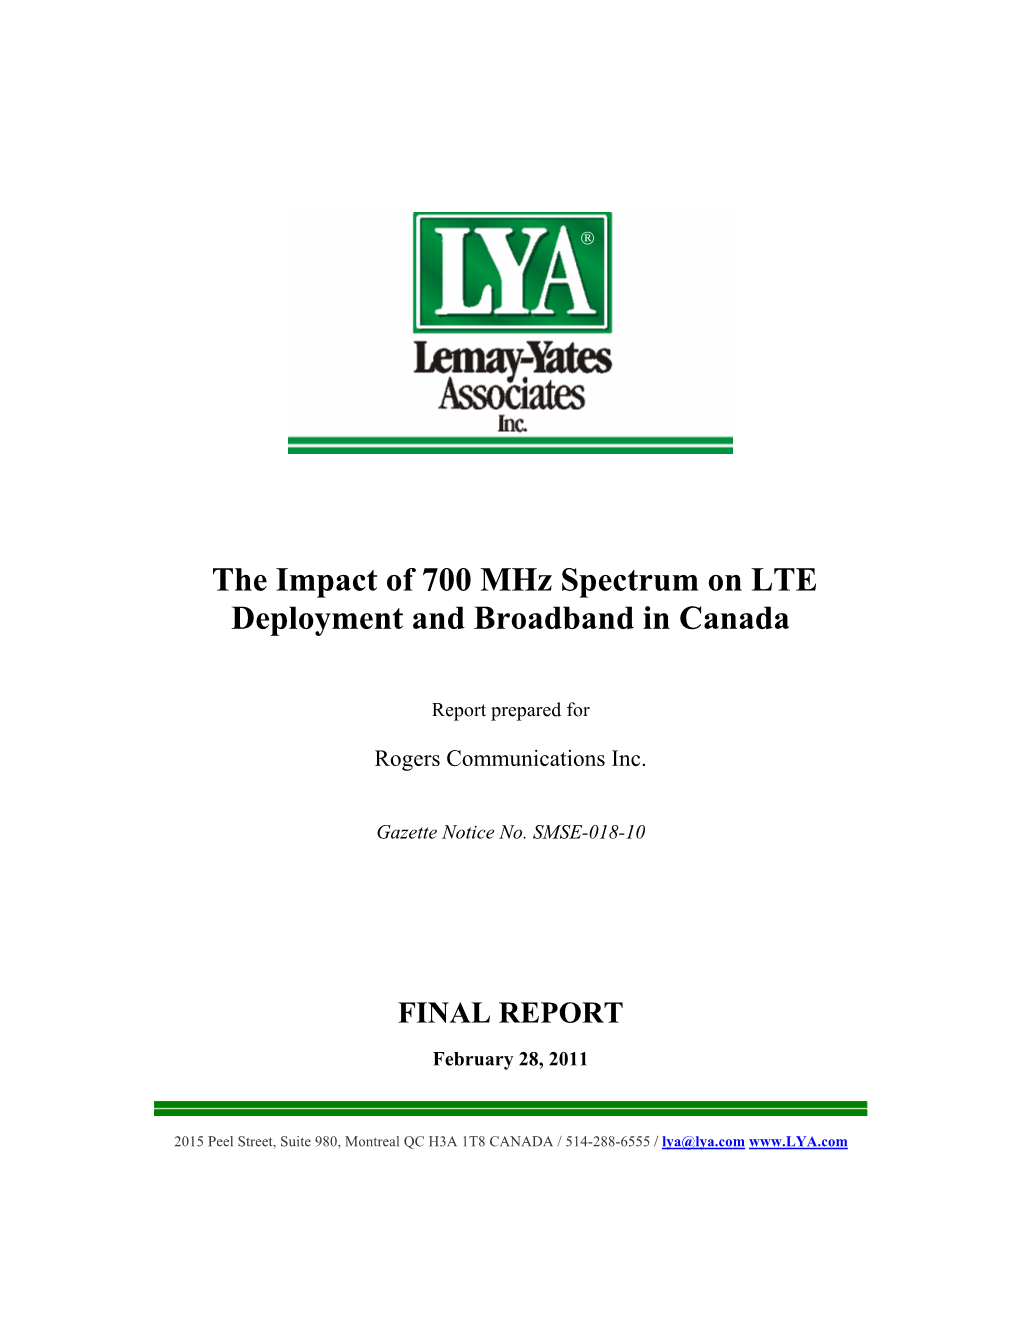 The Impact of 700 Mhz Spectrum on LTE Deployment and Broadband in Canada